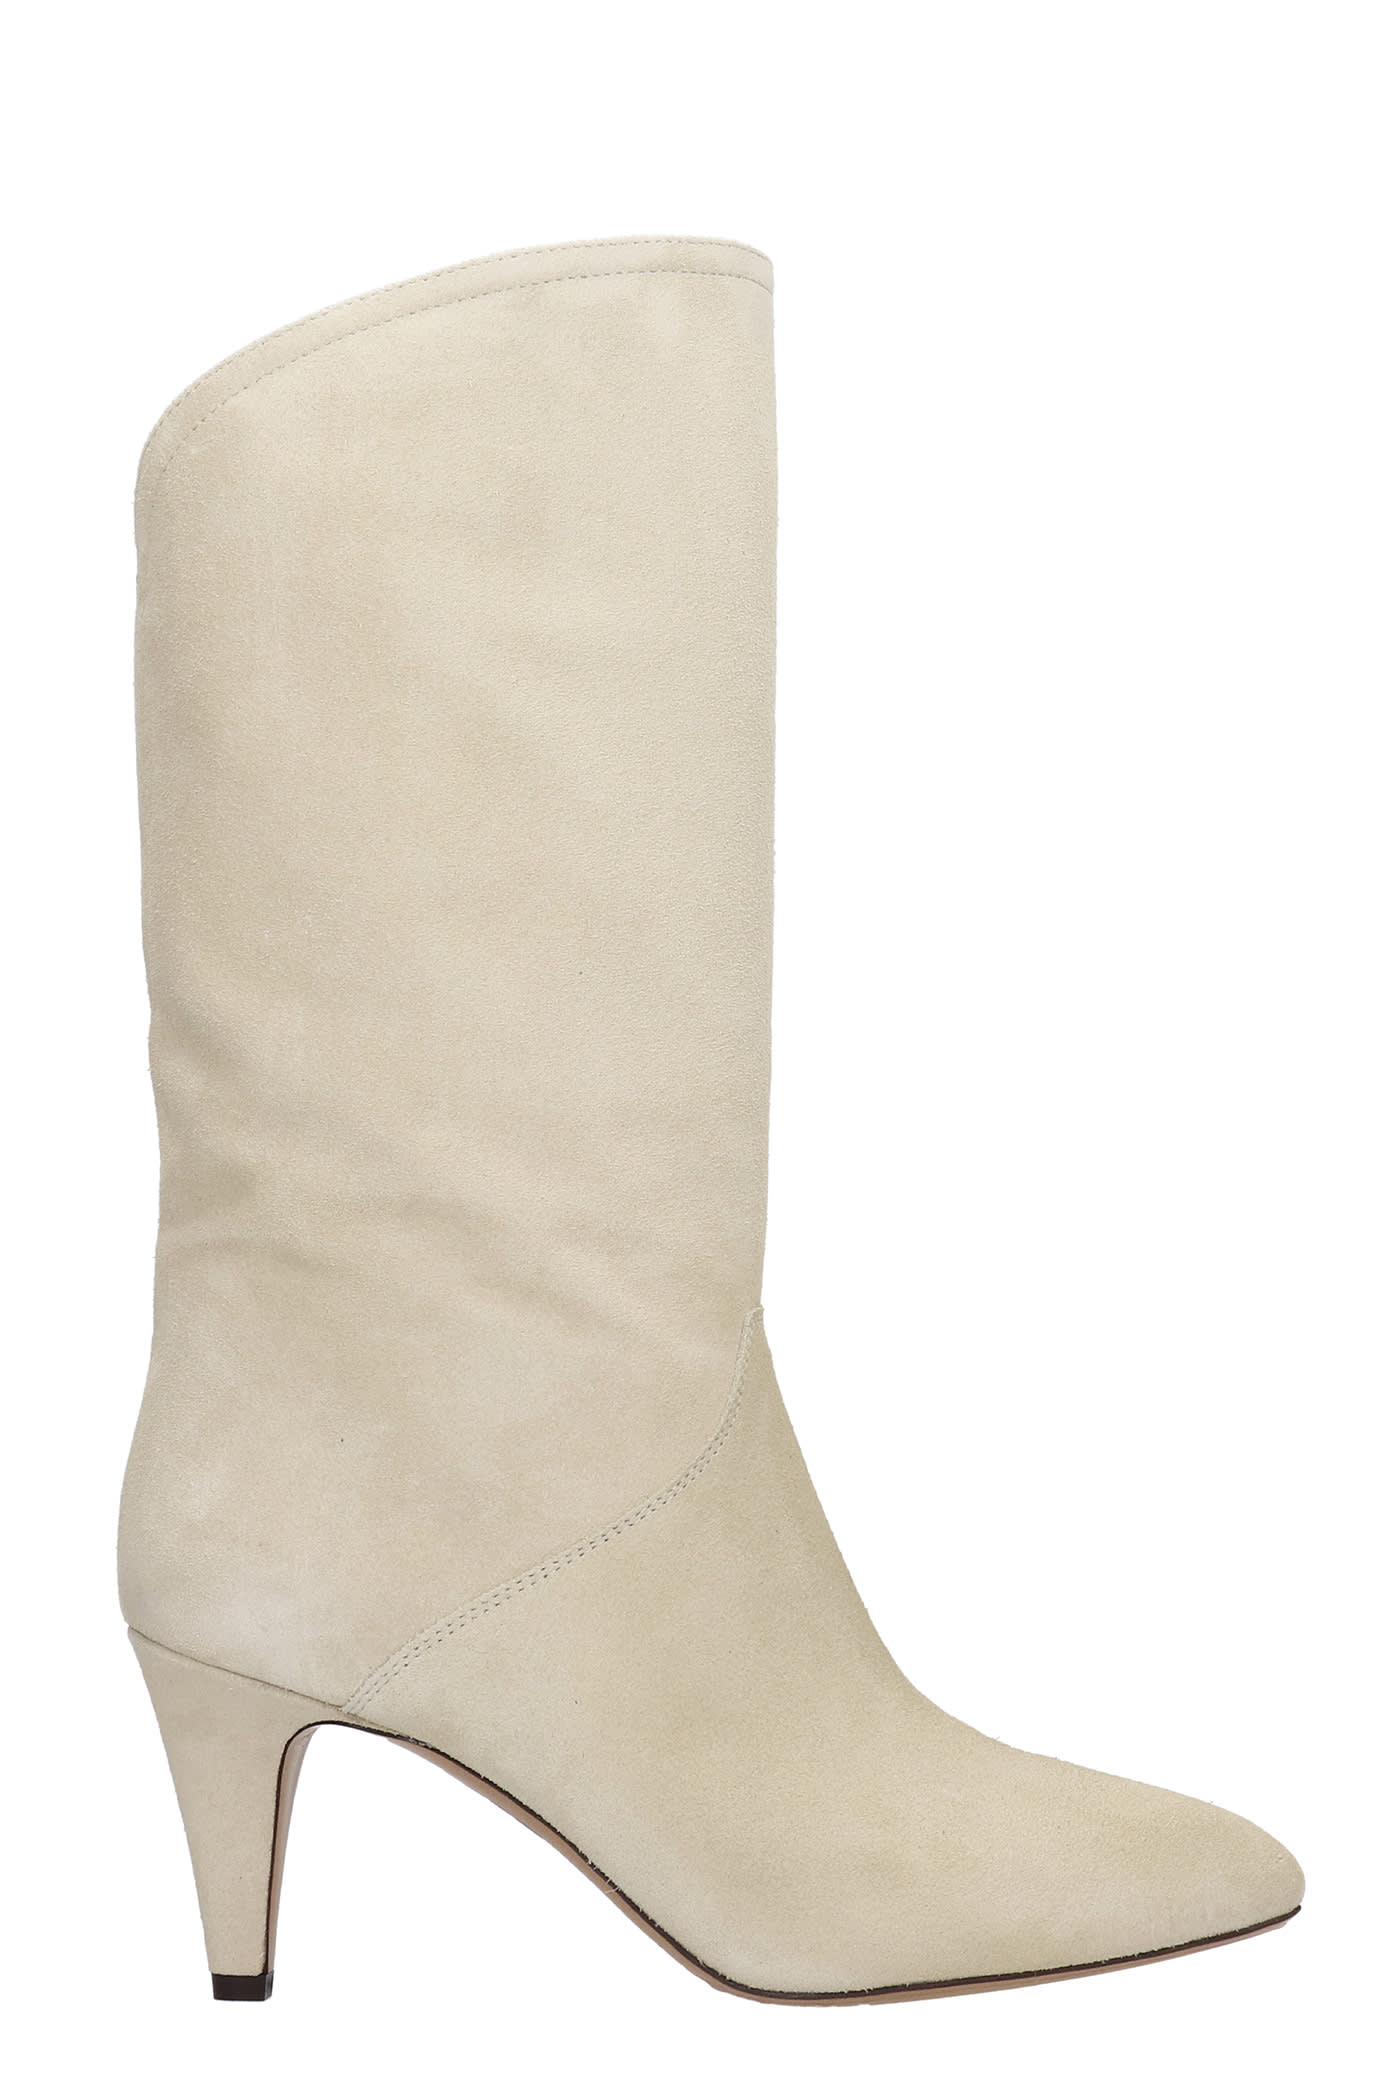 Buy Isabel Marant Leye Low Heels Ankle Boots In Beige Suede online, shop Isabel Marant shoes with free shipping